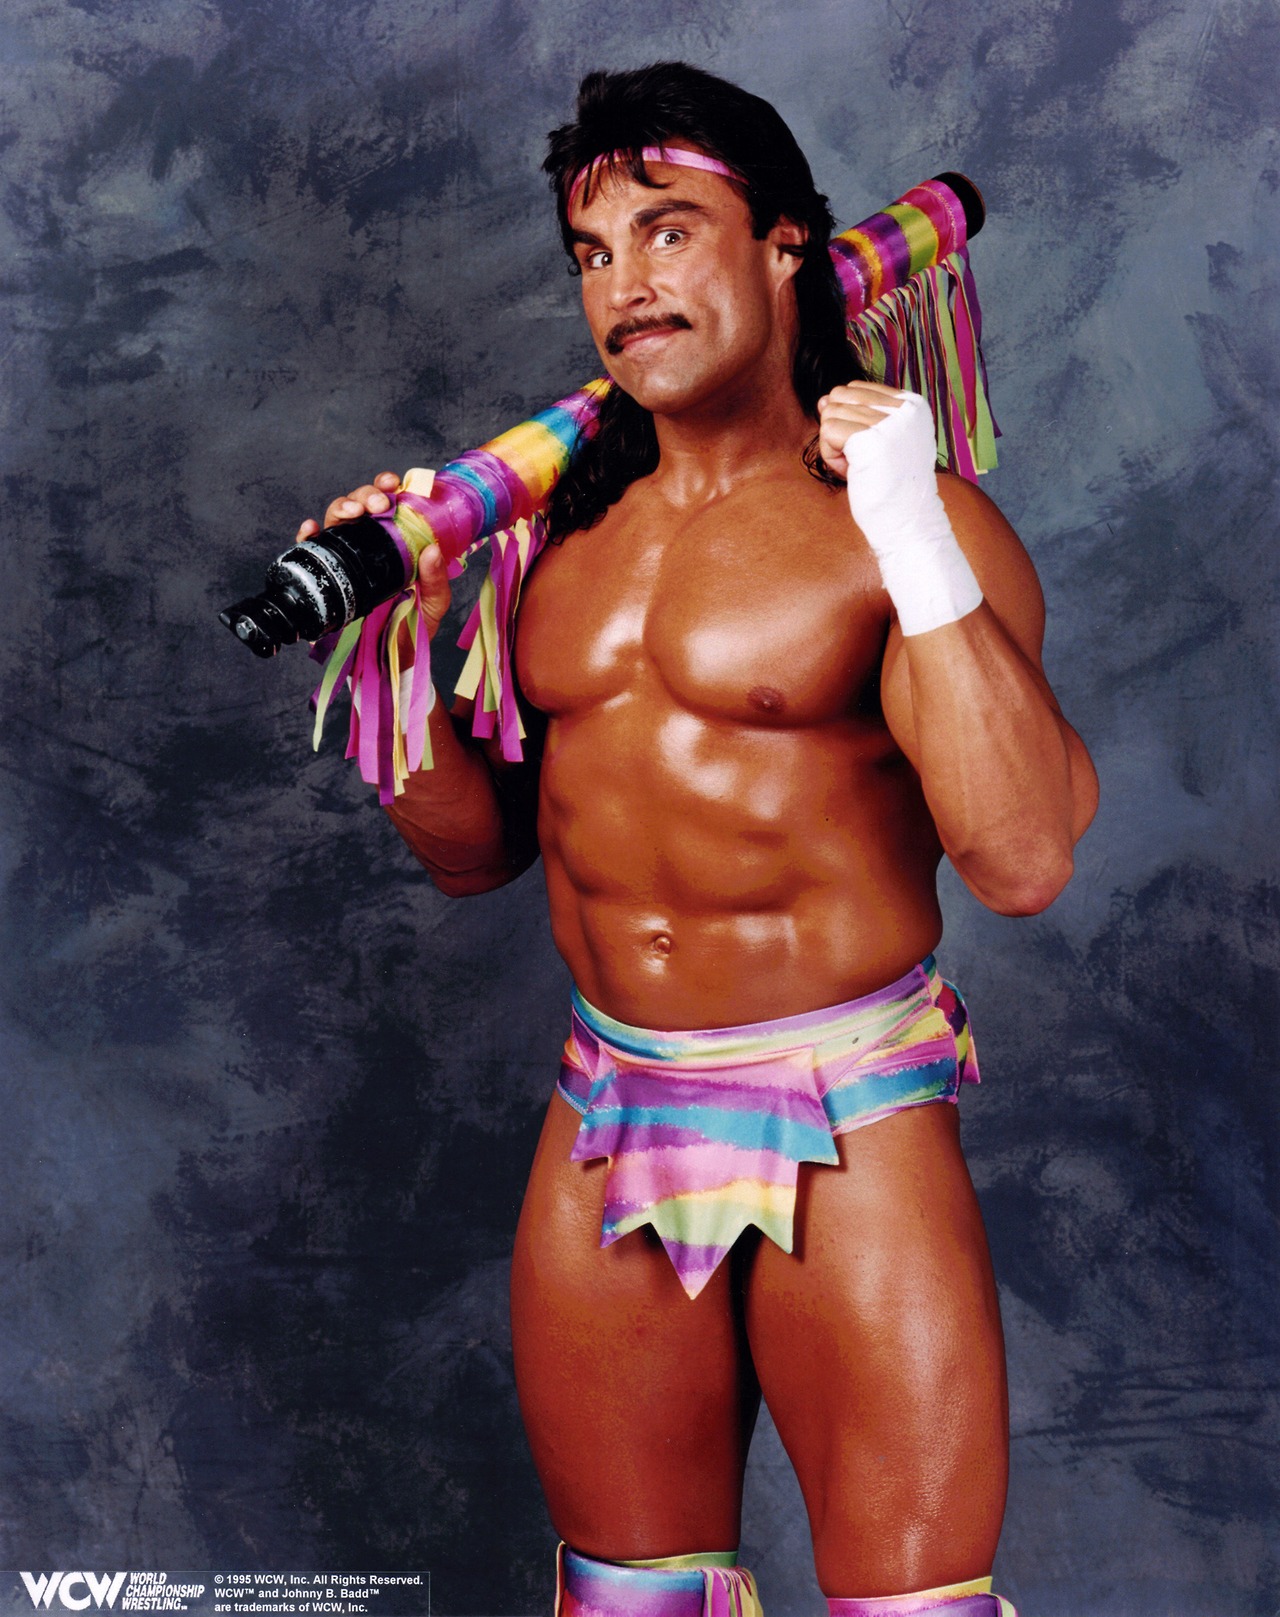 Johnny B. Badd posing in pink and blue trunks